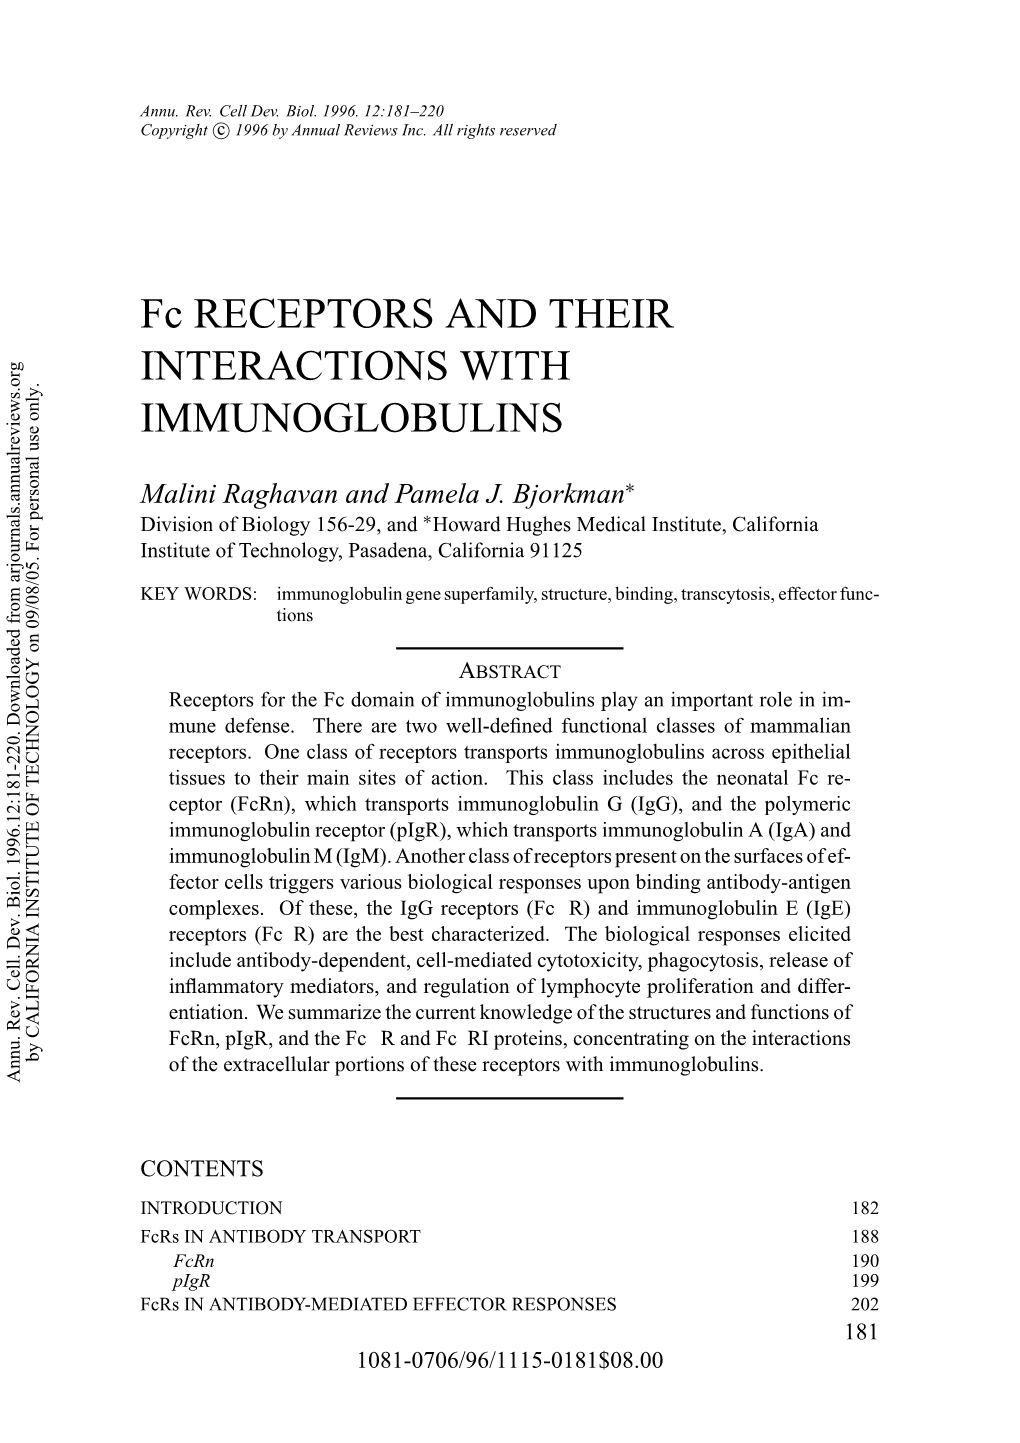 Fc RECEPTORS and THEIR INTERACTIONS with IMMUNOGLOBULINS